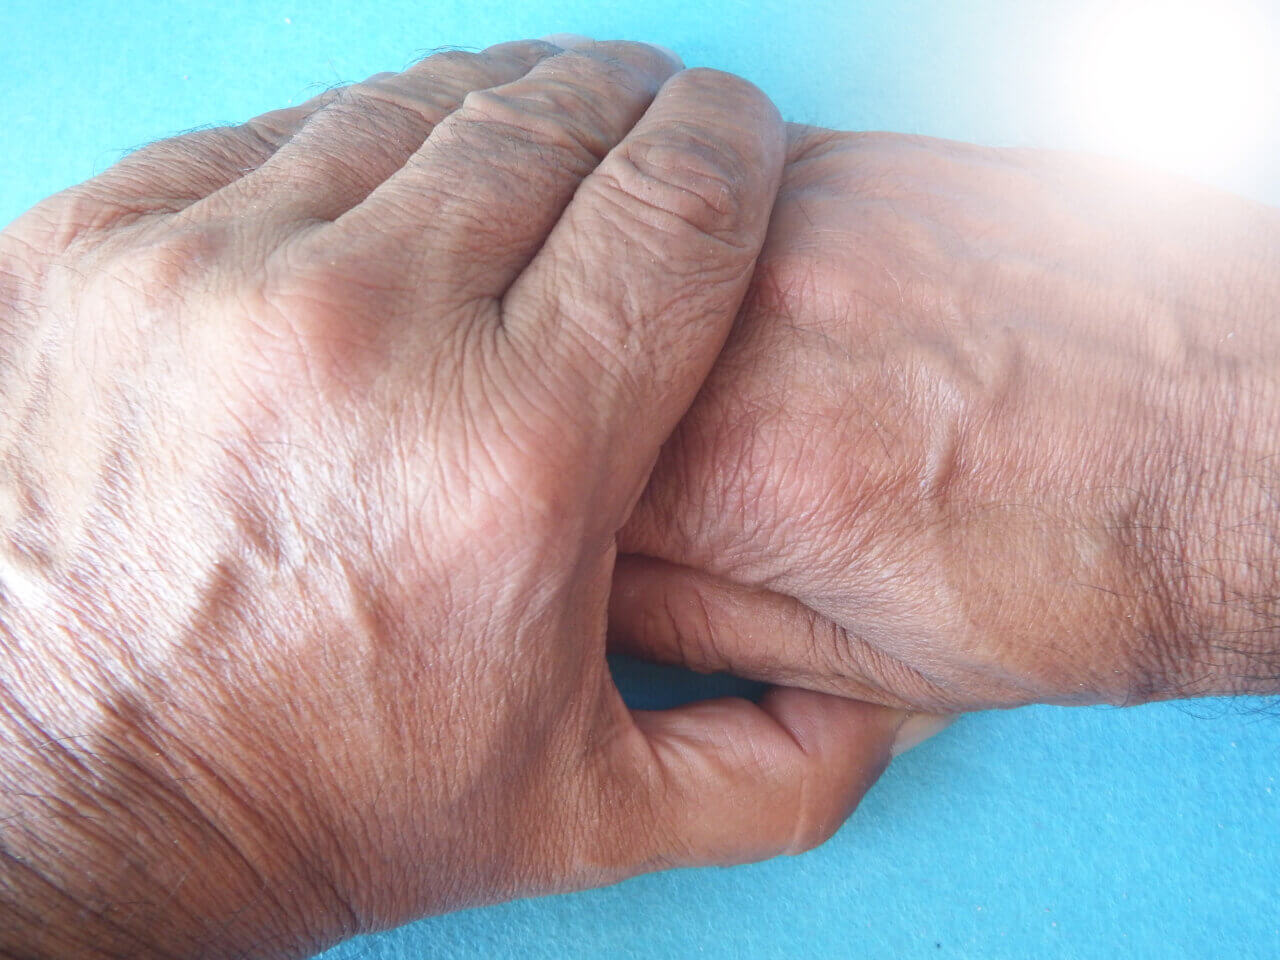 holding hands to stop parkinson's tremors